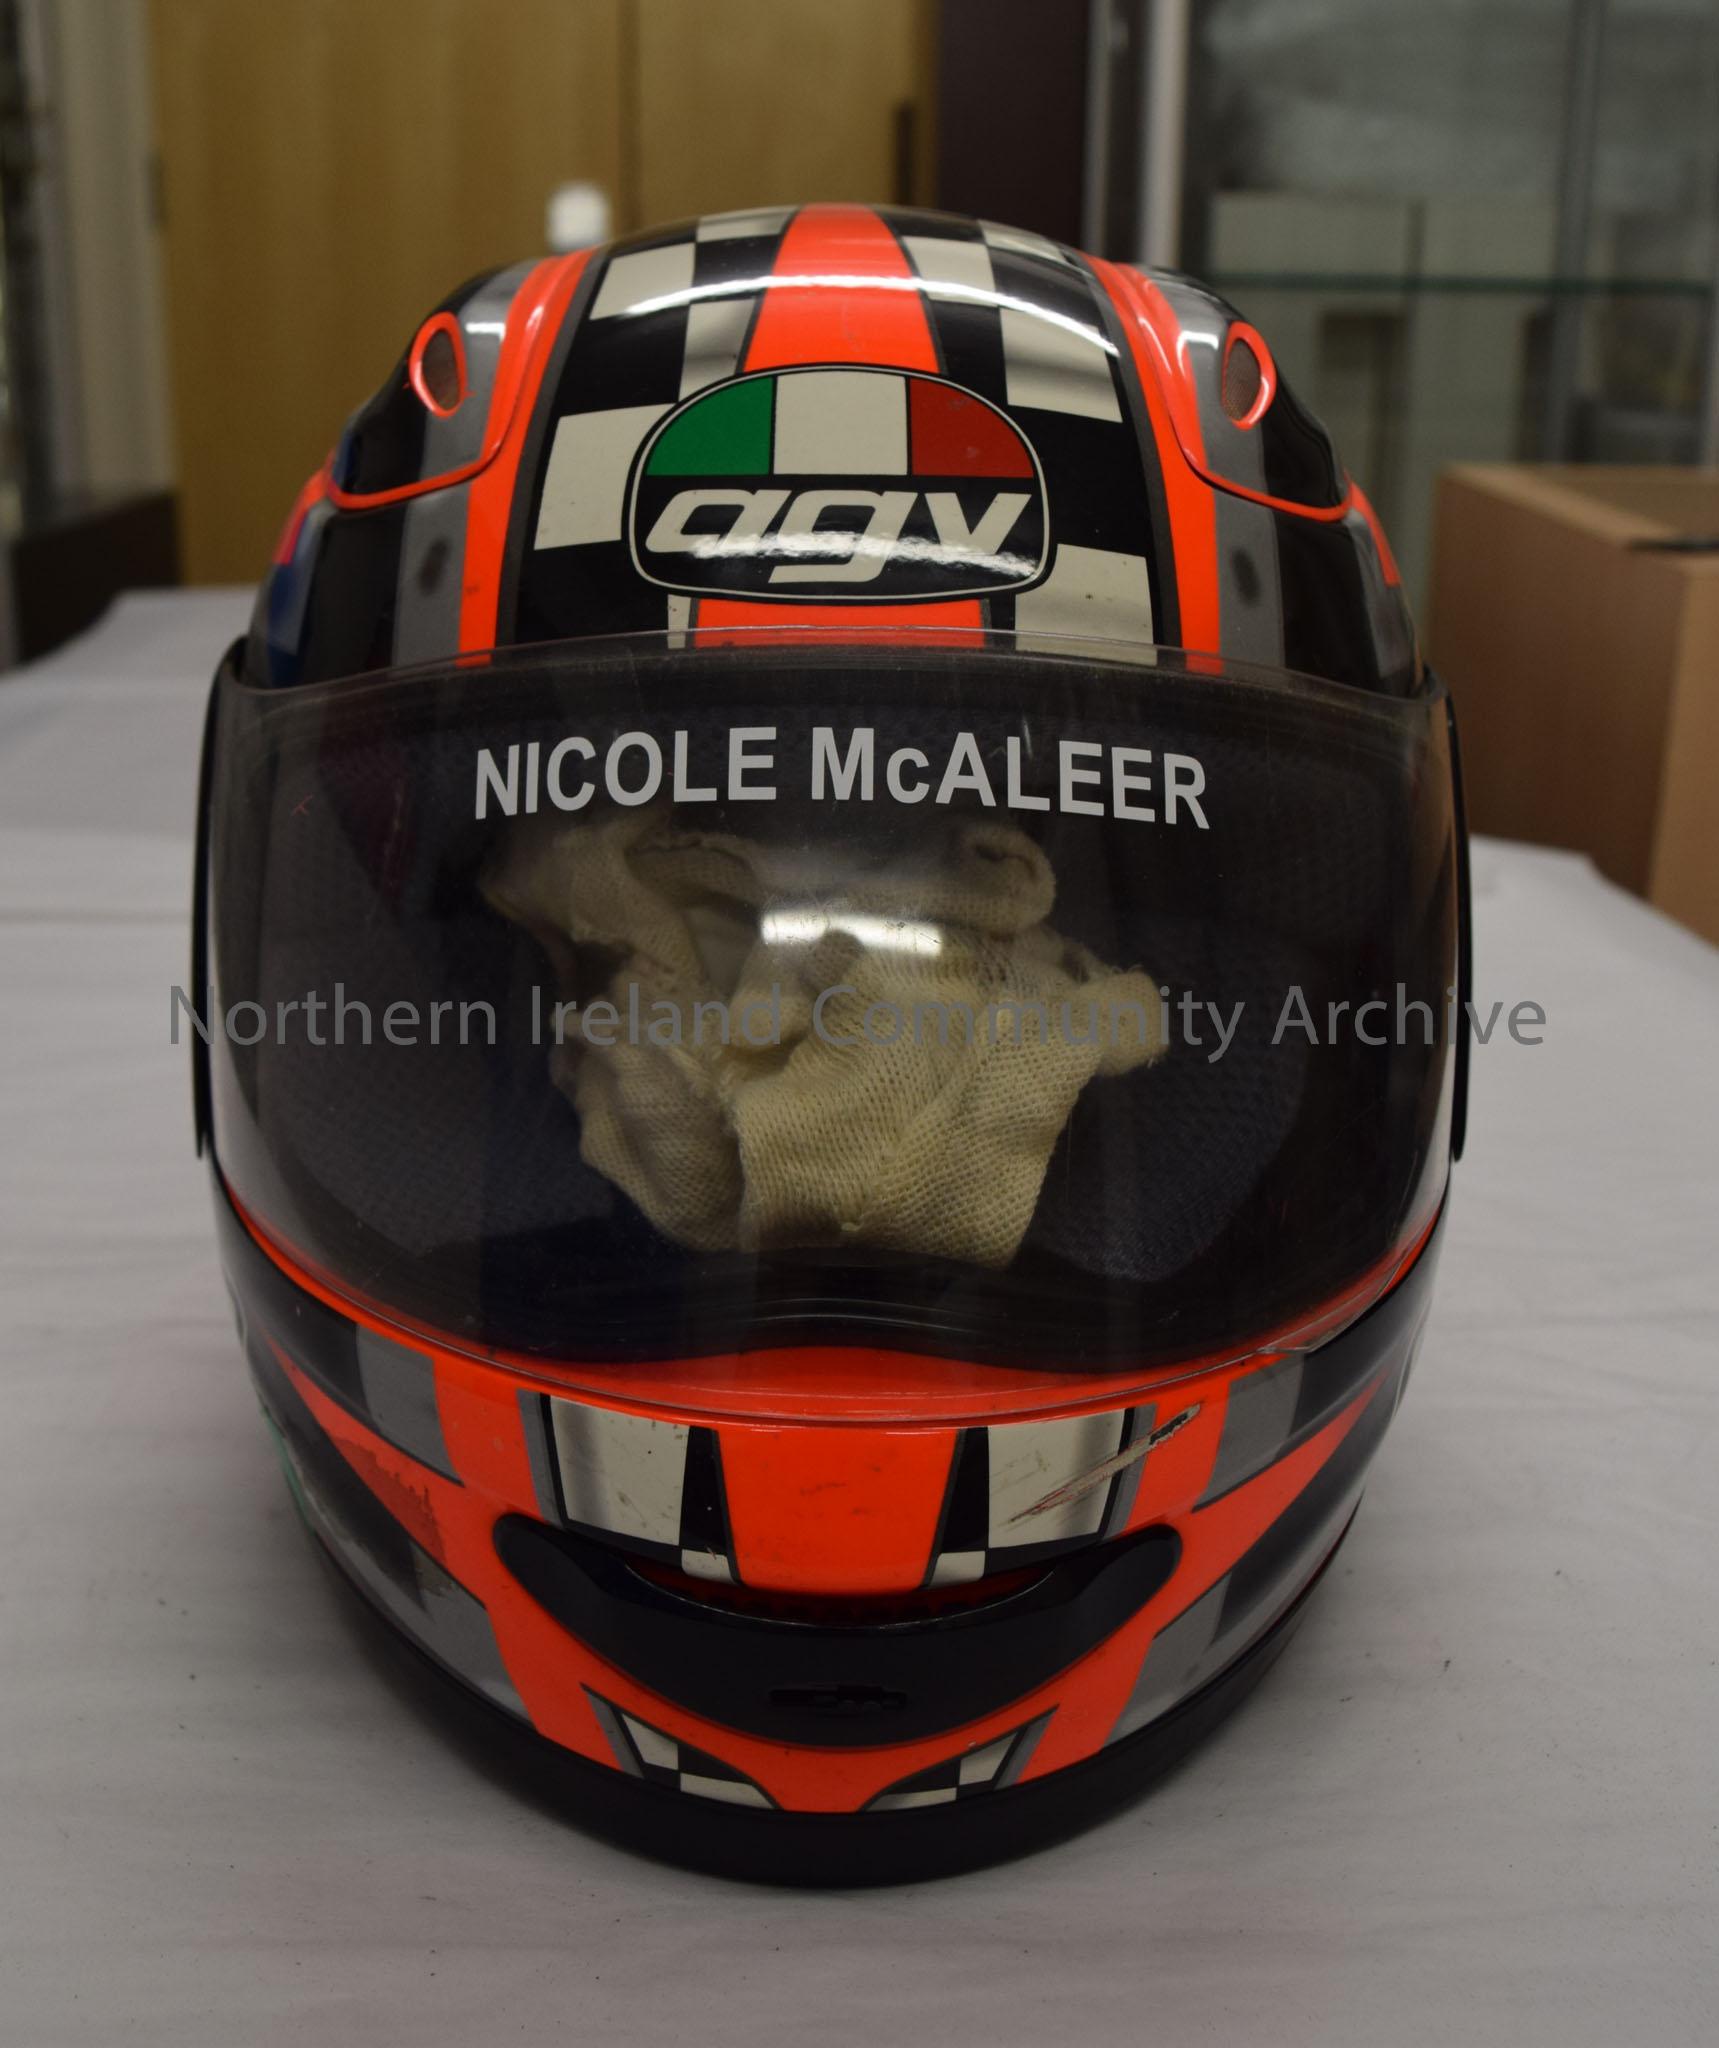 AGV Motorcycle helmet belonging to Nicole McAleer. Fluorescent orange with black and white check pattern on the top and grey and black down the side. – 2016.1 (2)